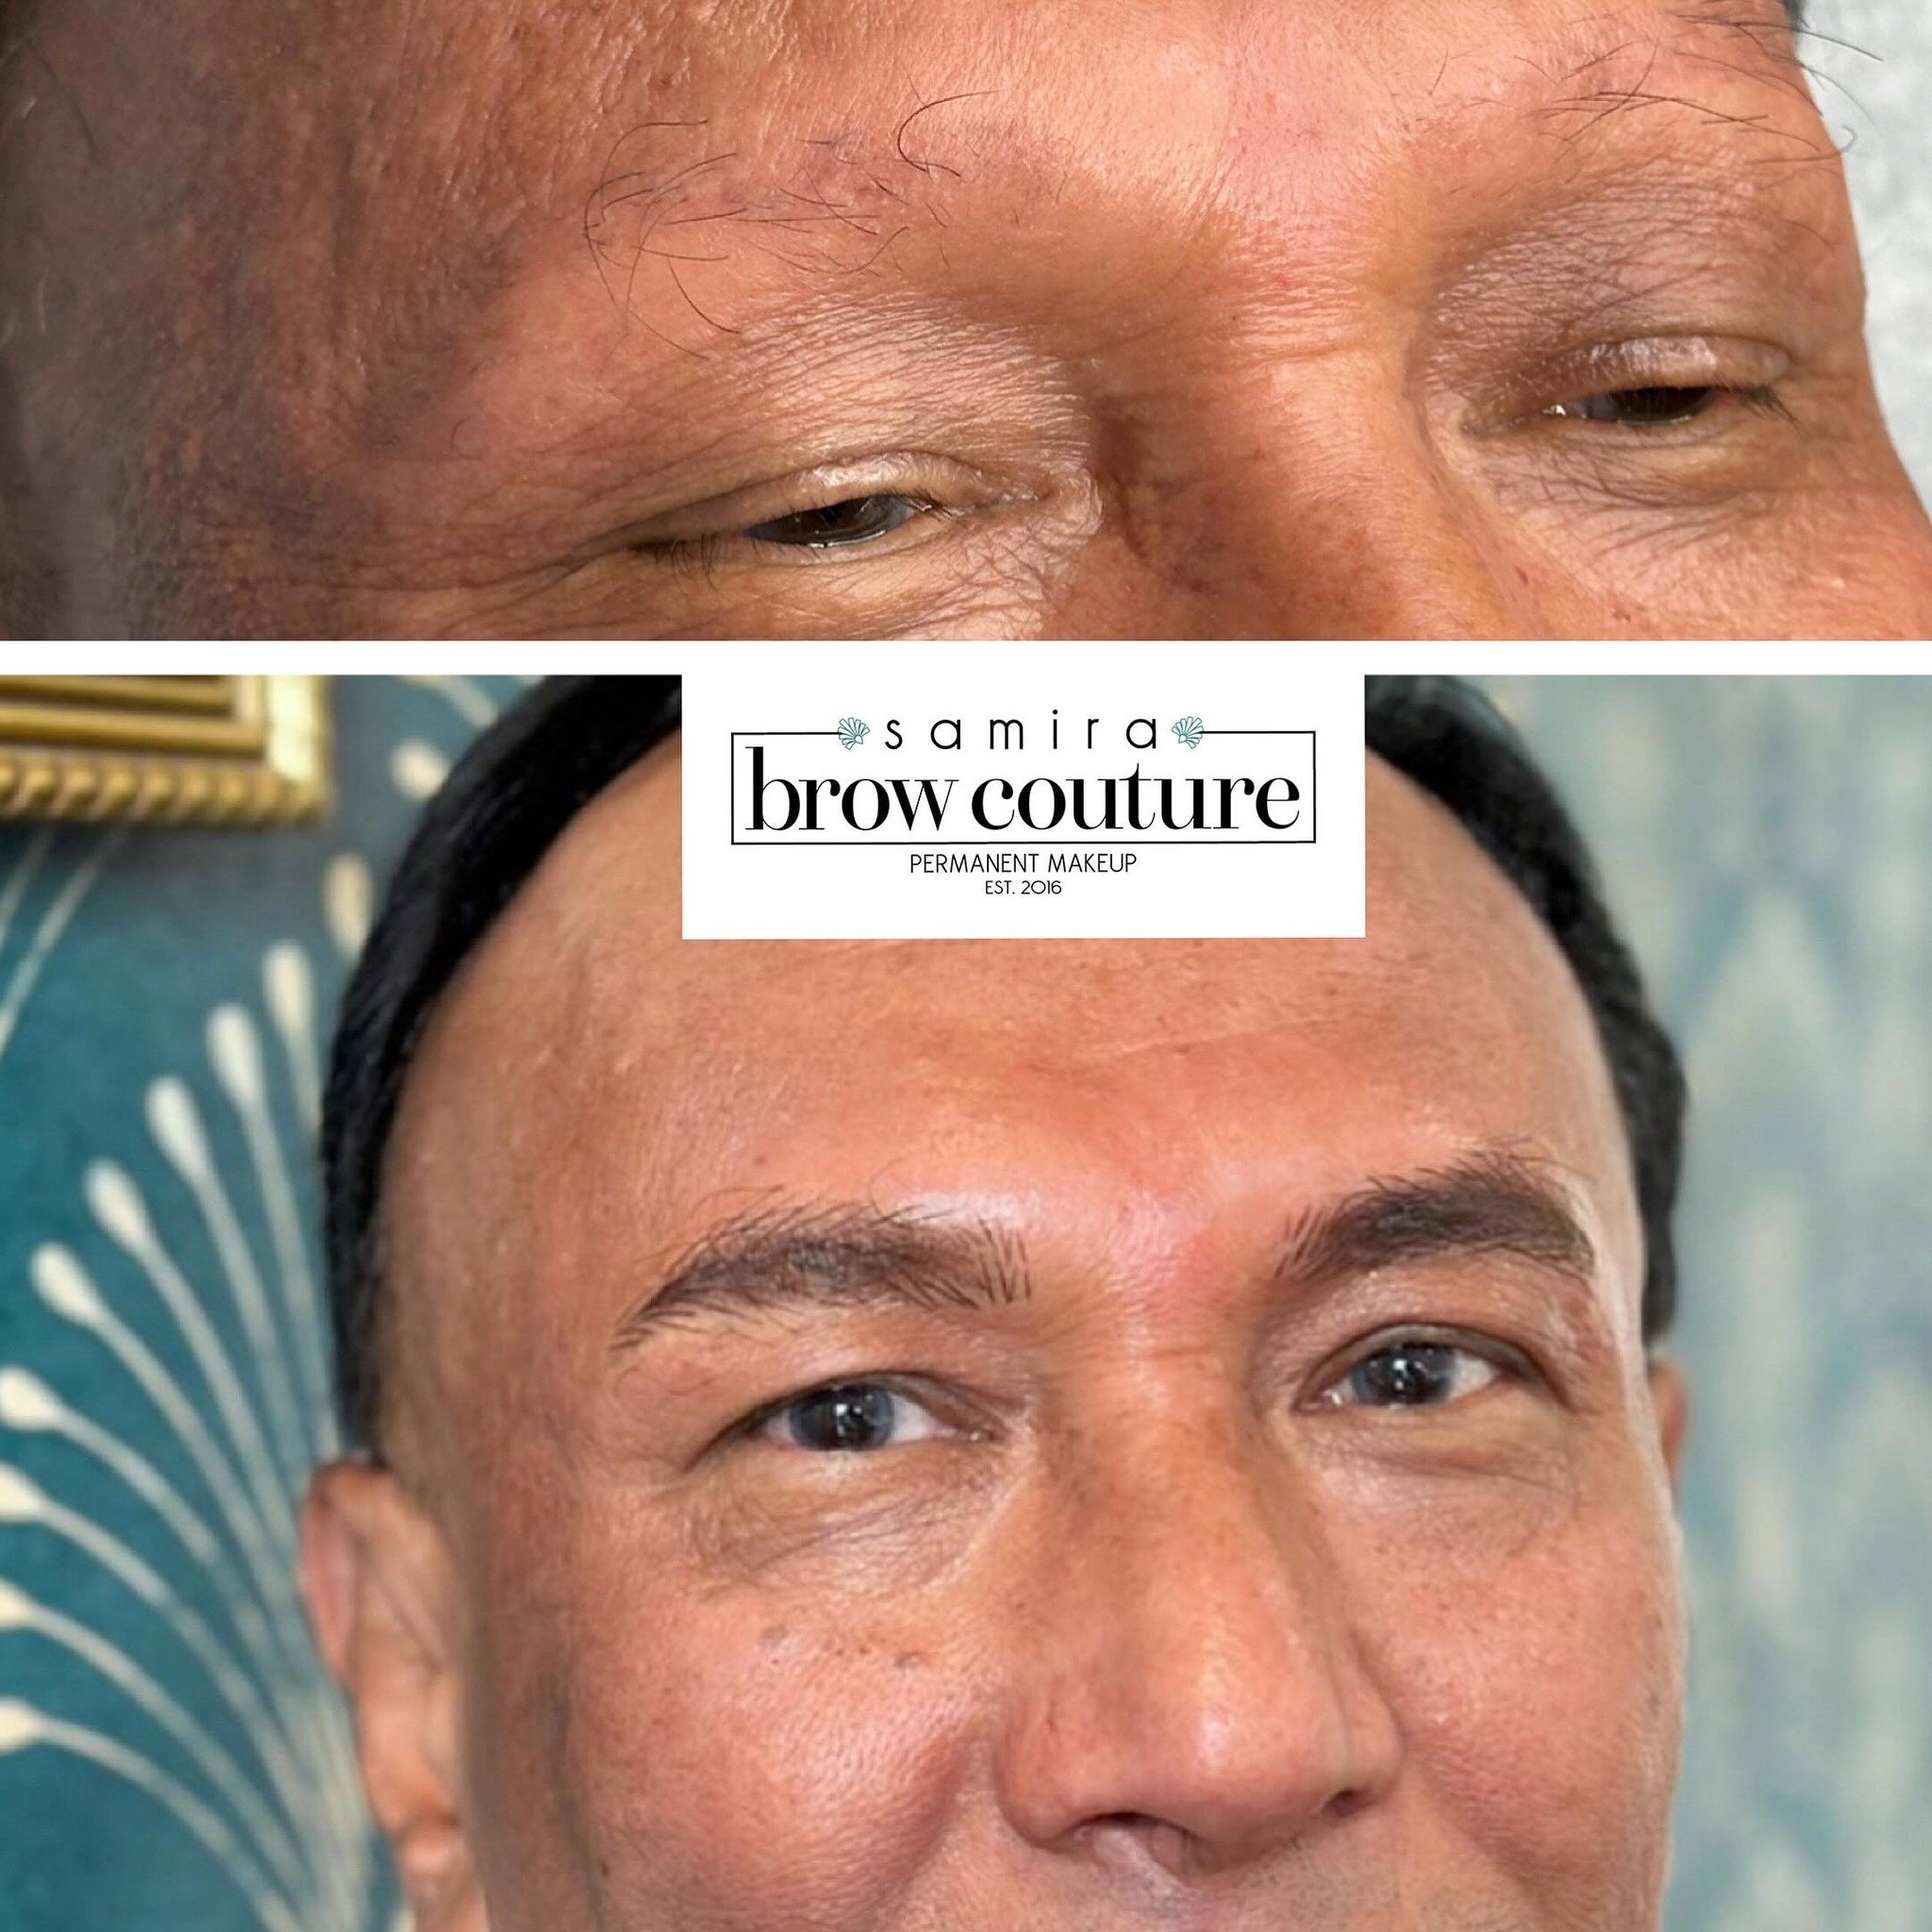 He has alopecia and lost his brows over the past 3 years because in his words &ldquo;his business caused him a lot of stress and his daughters encouraged him to get his brows done with me&rdquo;. At his appointment, he showed me a photo of himself fr